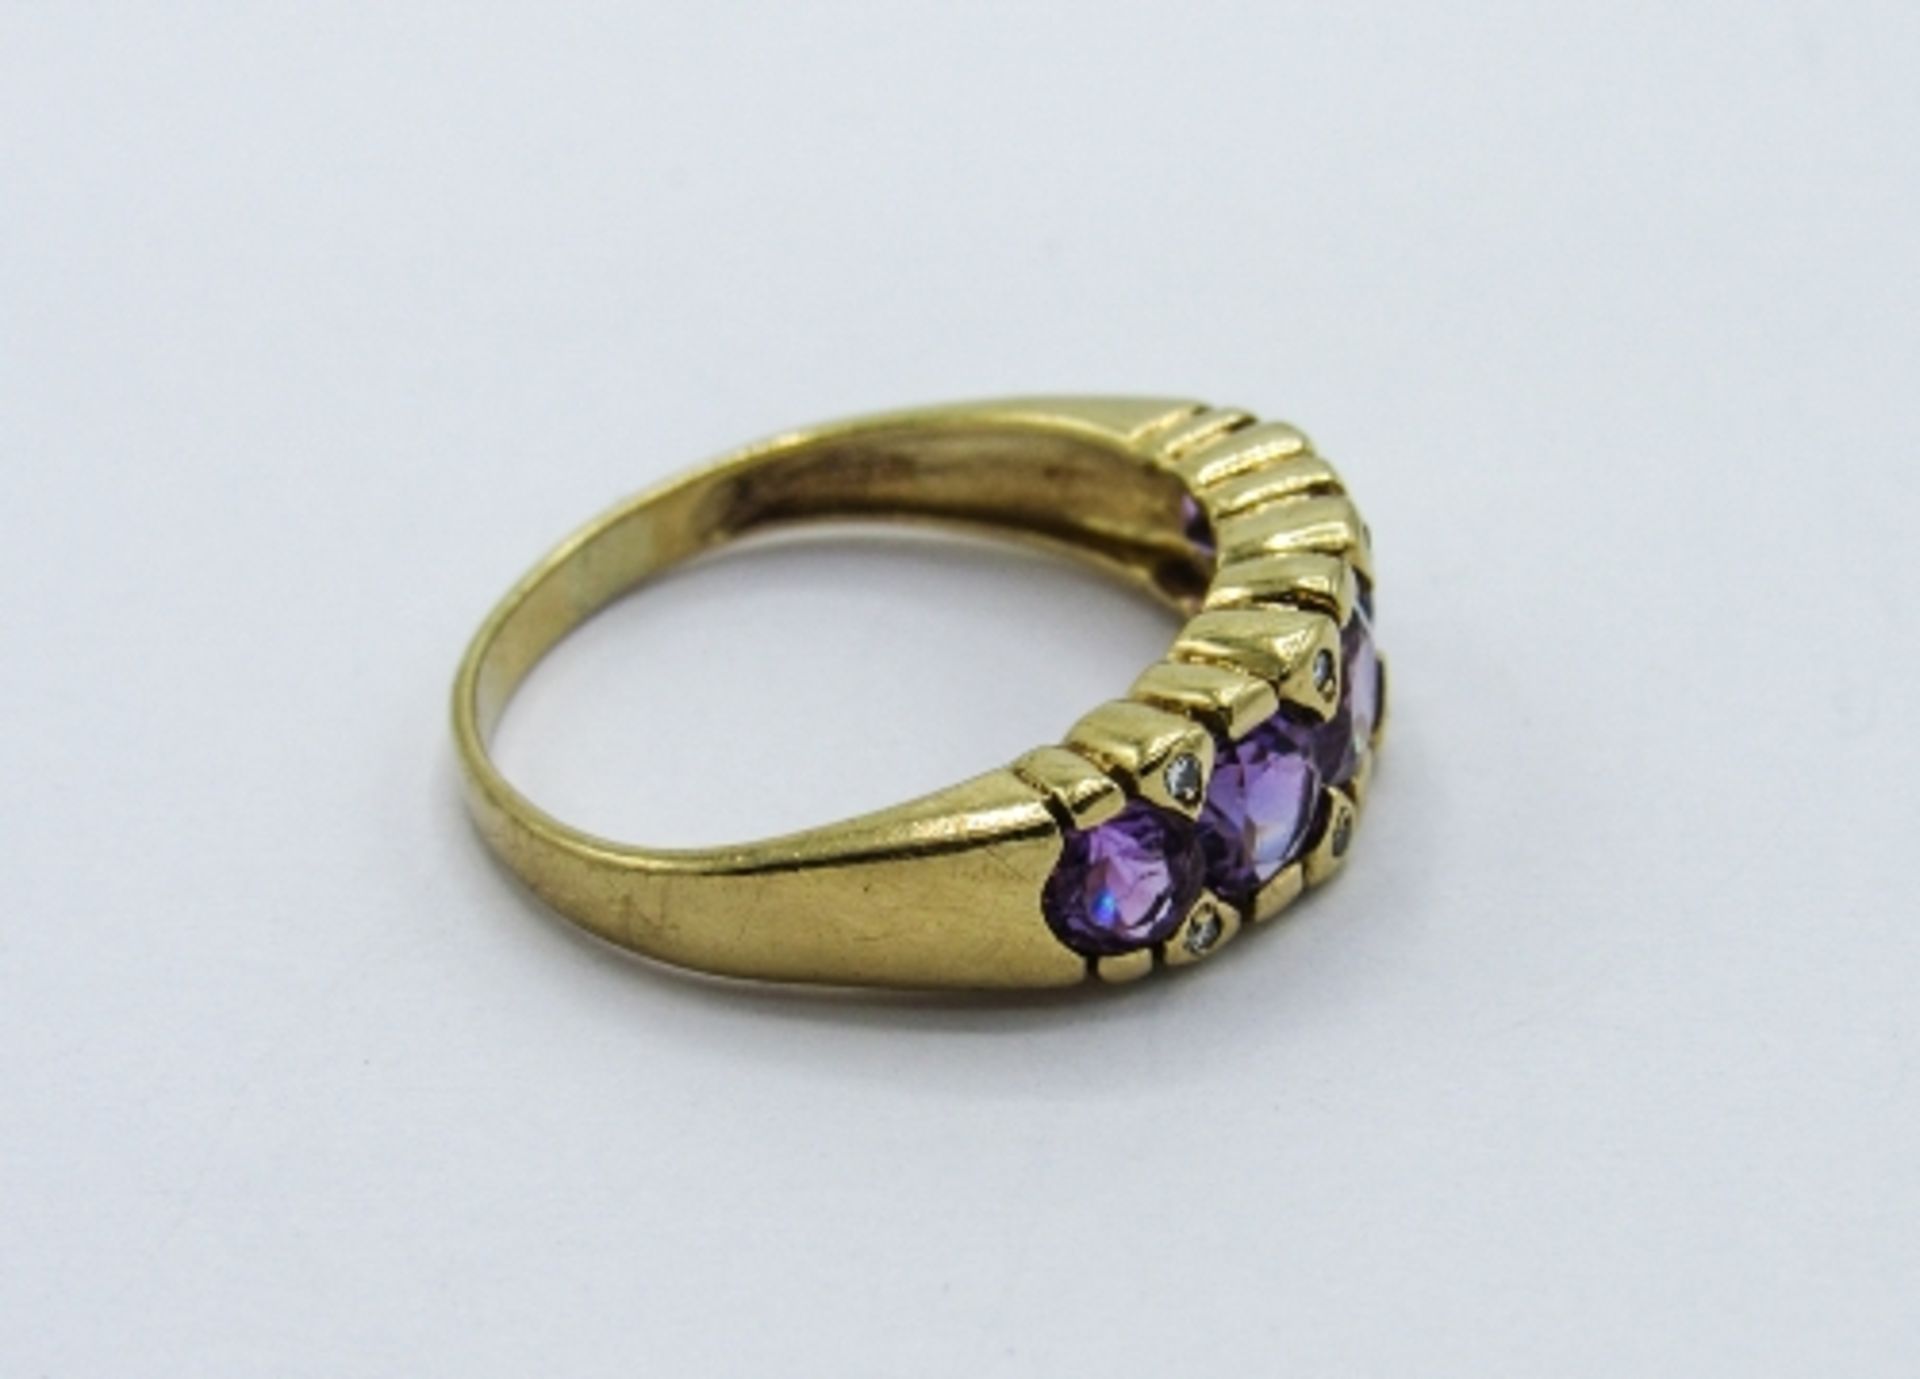 9ct gold amethyst & diamond ring, weight 3.2gms, size T. Estimate £150-180 - Image 2 of 3